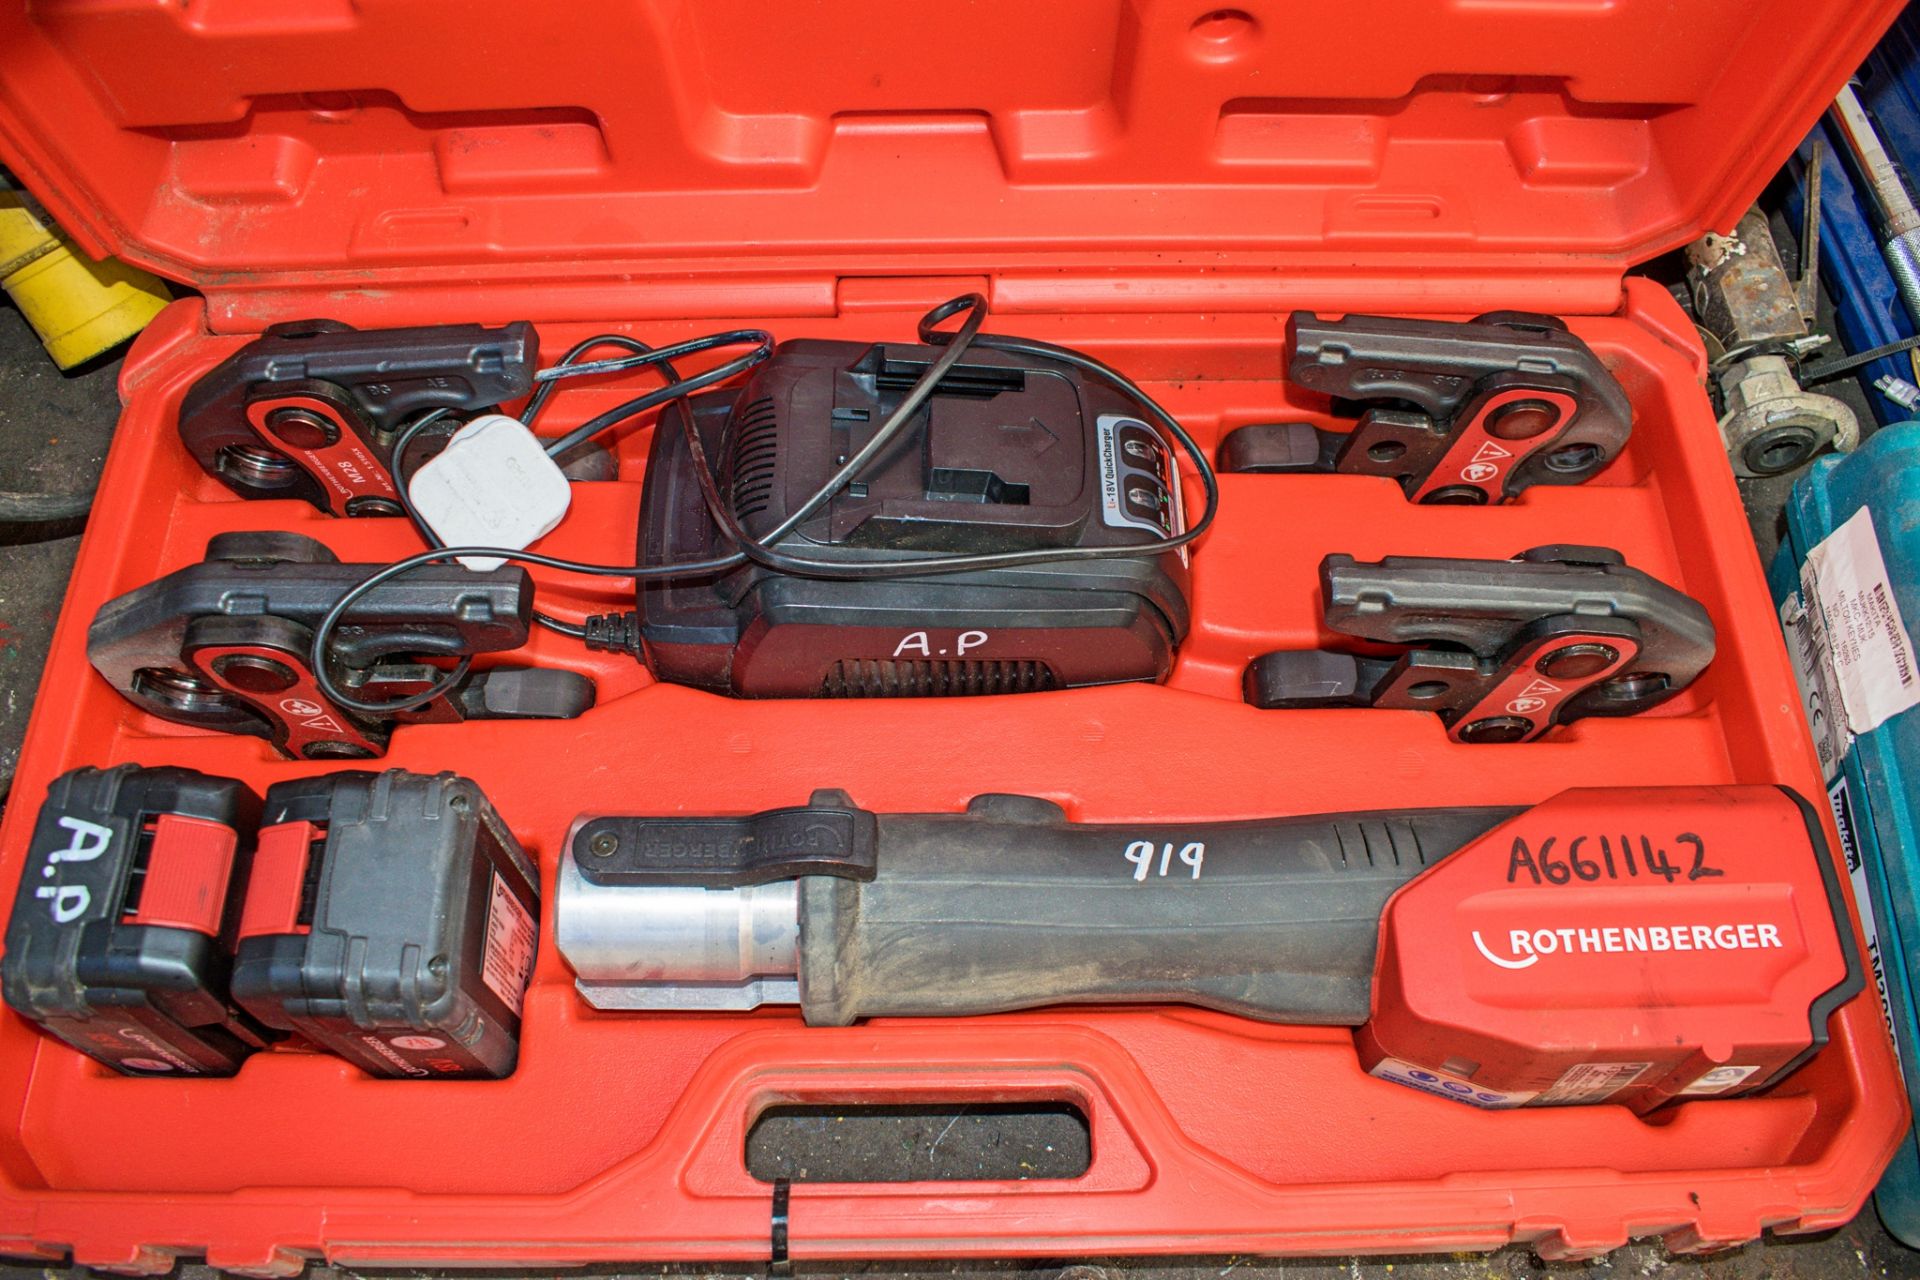 Rothenberger 18v cordless pipe crimping tool c/w 4 heads, charger, 2 batteries & carry case A661142